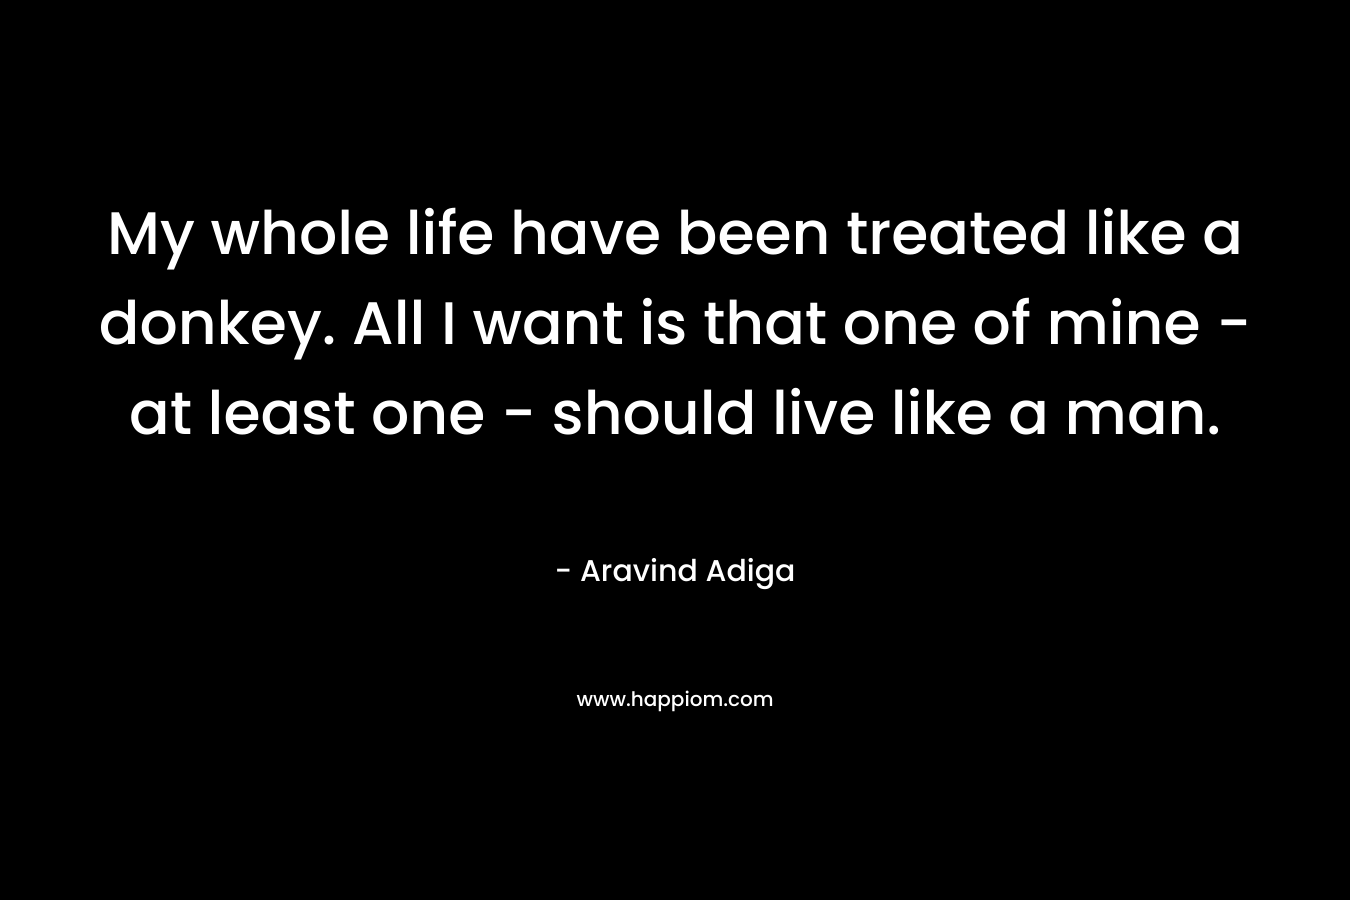 My whole life have been treated like a donkey. All I want is that one of mine – at least one – should live like a man. – Aravind Adiga